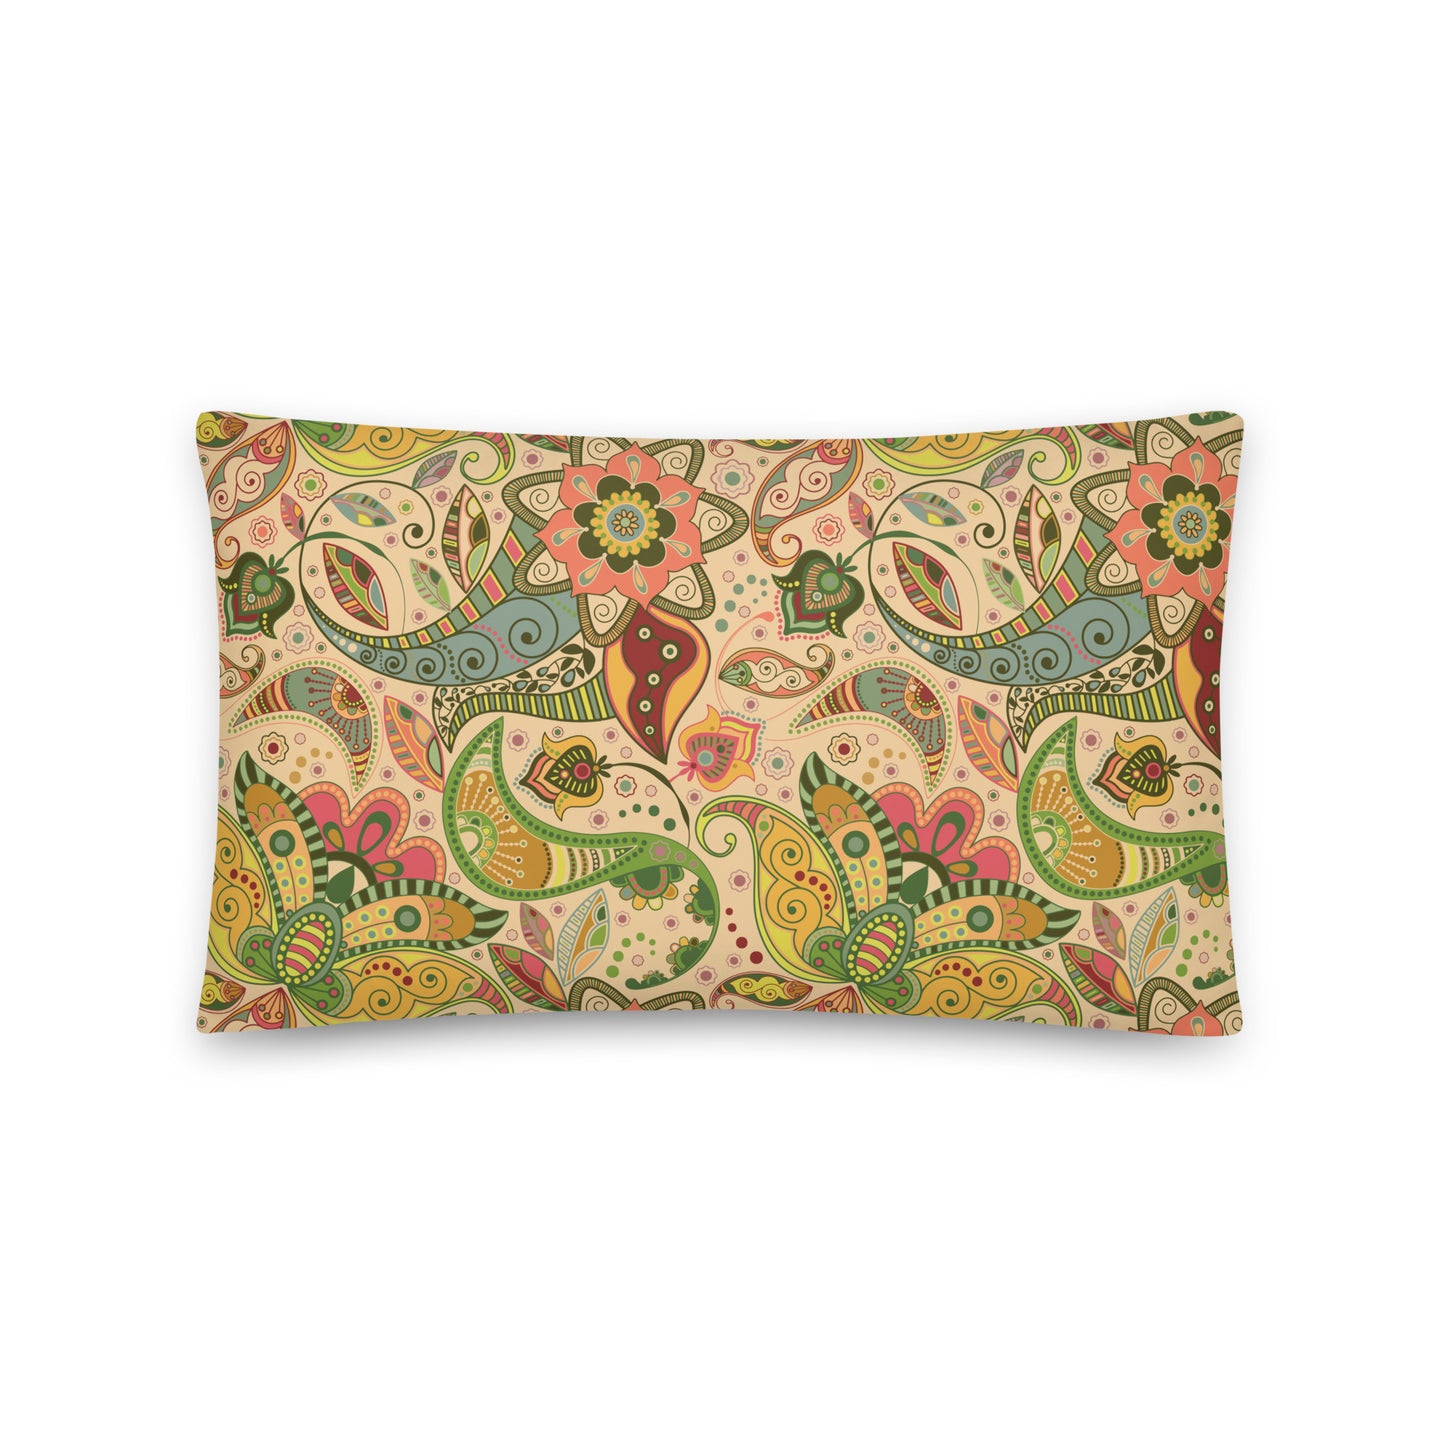 Floral Tribe - Sustainably Made Pillows